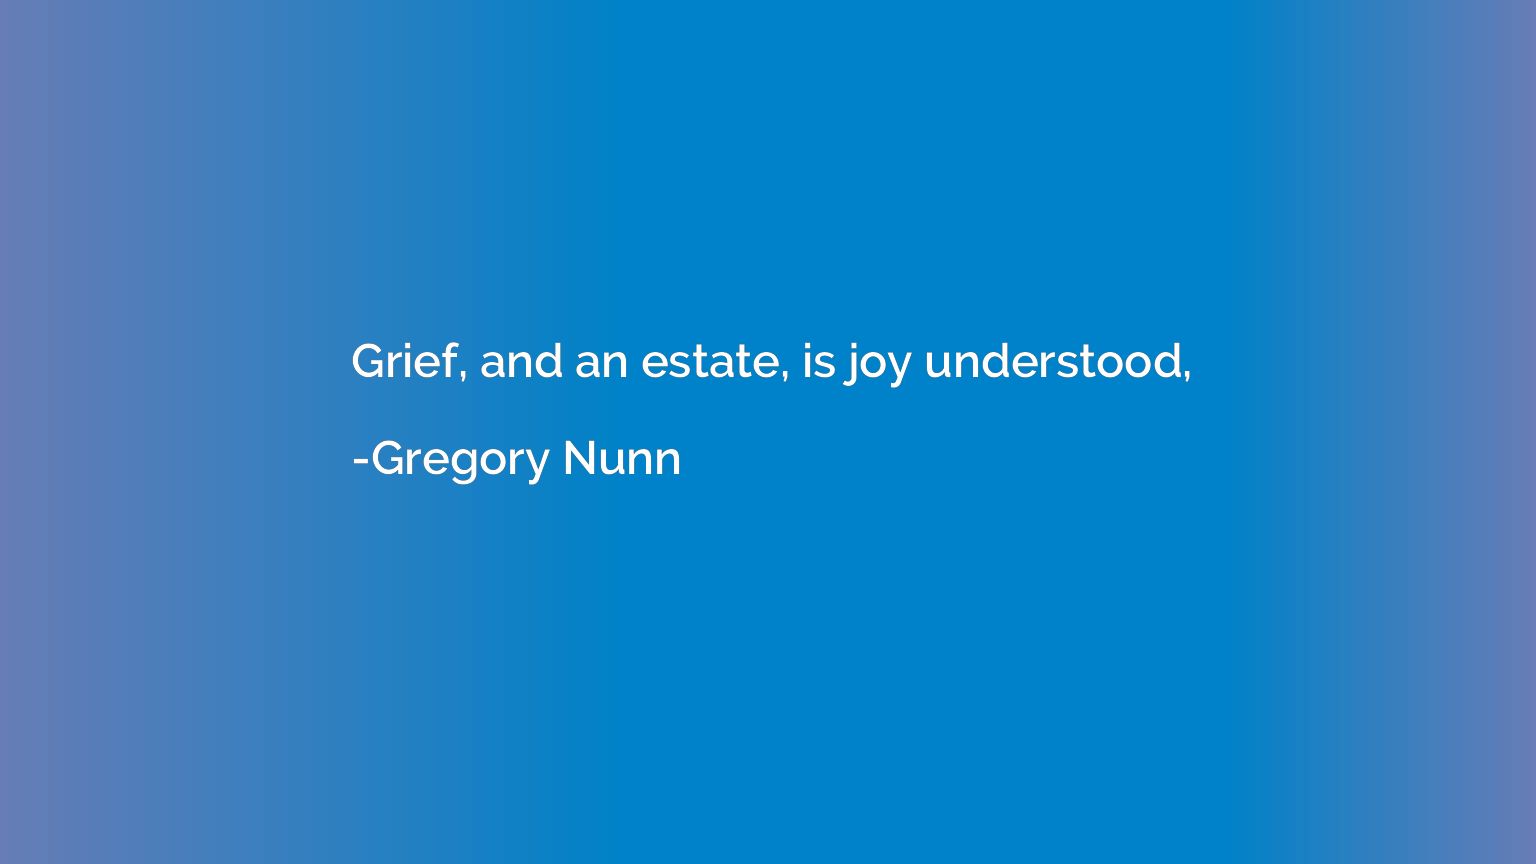 Grief, and an estate, is joy understood,